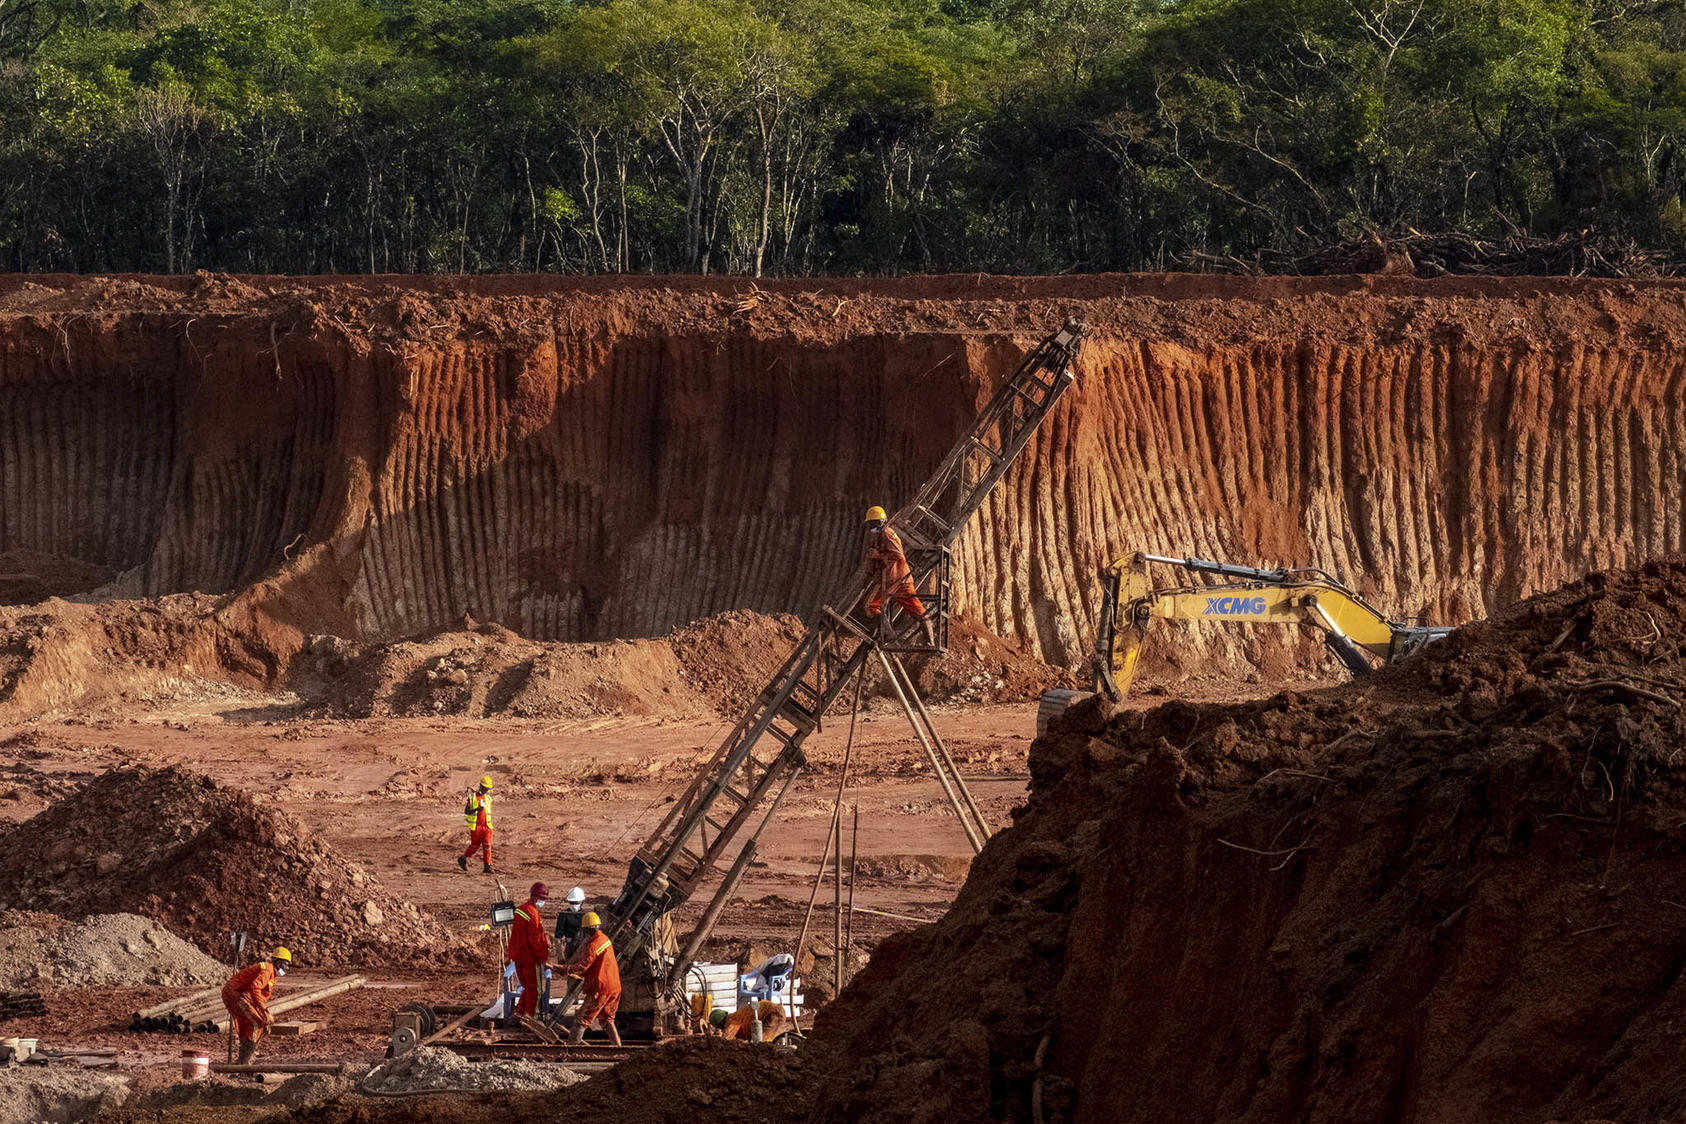 A Chinese-owned cobalt and copper mine in Kisanfu, DRC, April 27, 2021. The DRC supplies 70% of the world’s cobalt, and China owns or holds stake in nearly all of the country’s cobalt-producing mines. (Ashley Gilbertson/The New York Times)